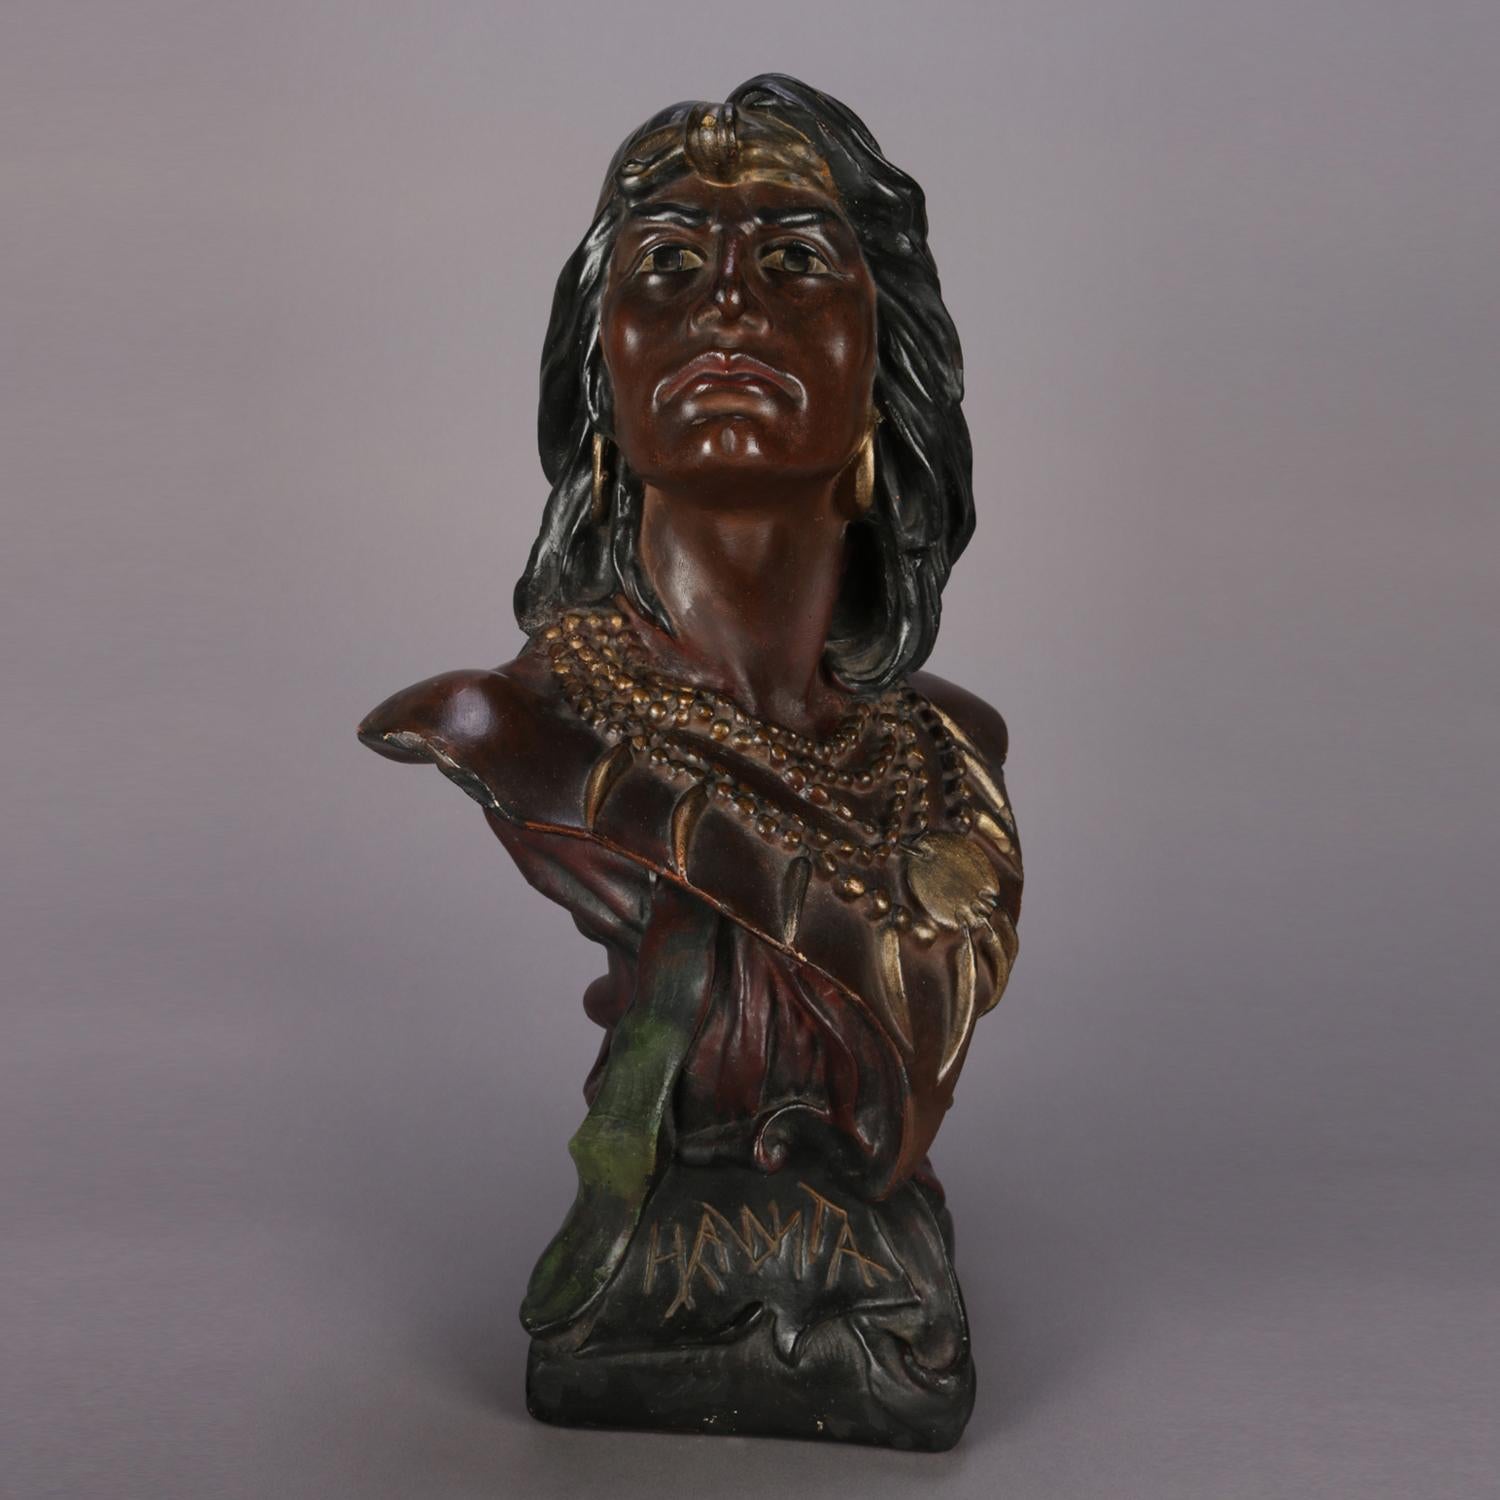 An antique and large hand painted and gilt chalkware portrait sculpture depicts bust of Native American Indian Chief or Brave Hawata, titled 